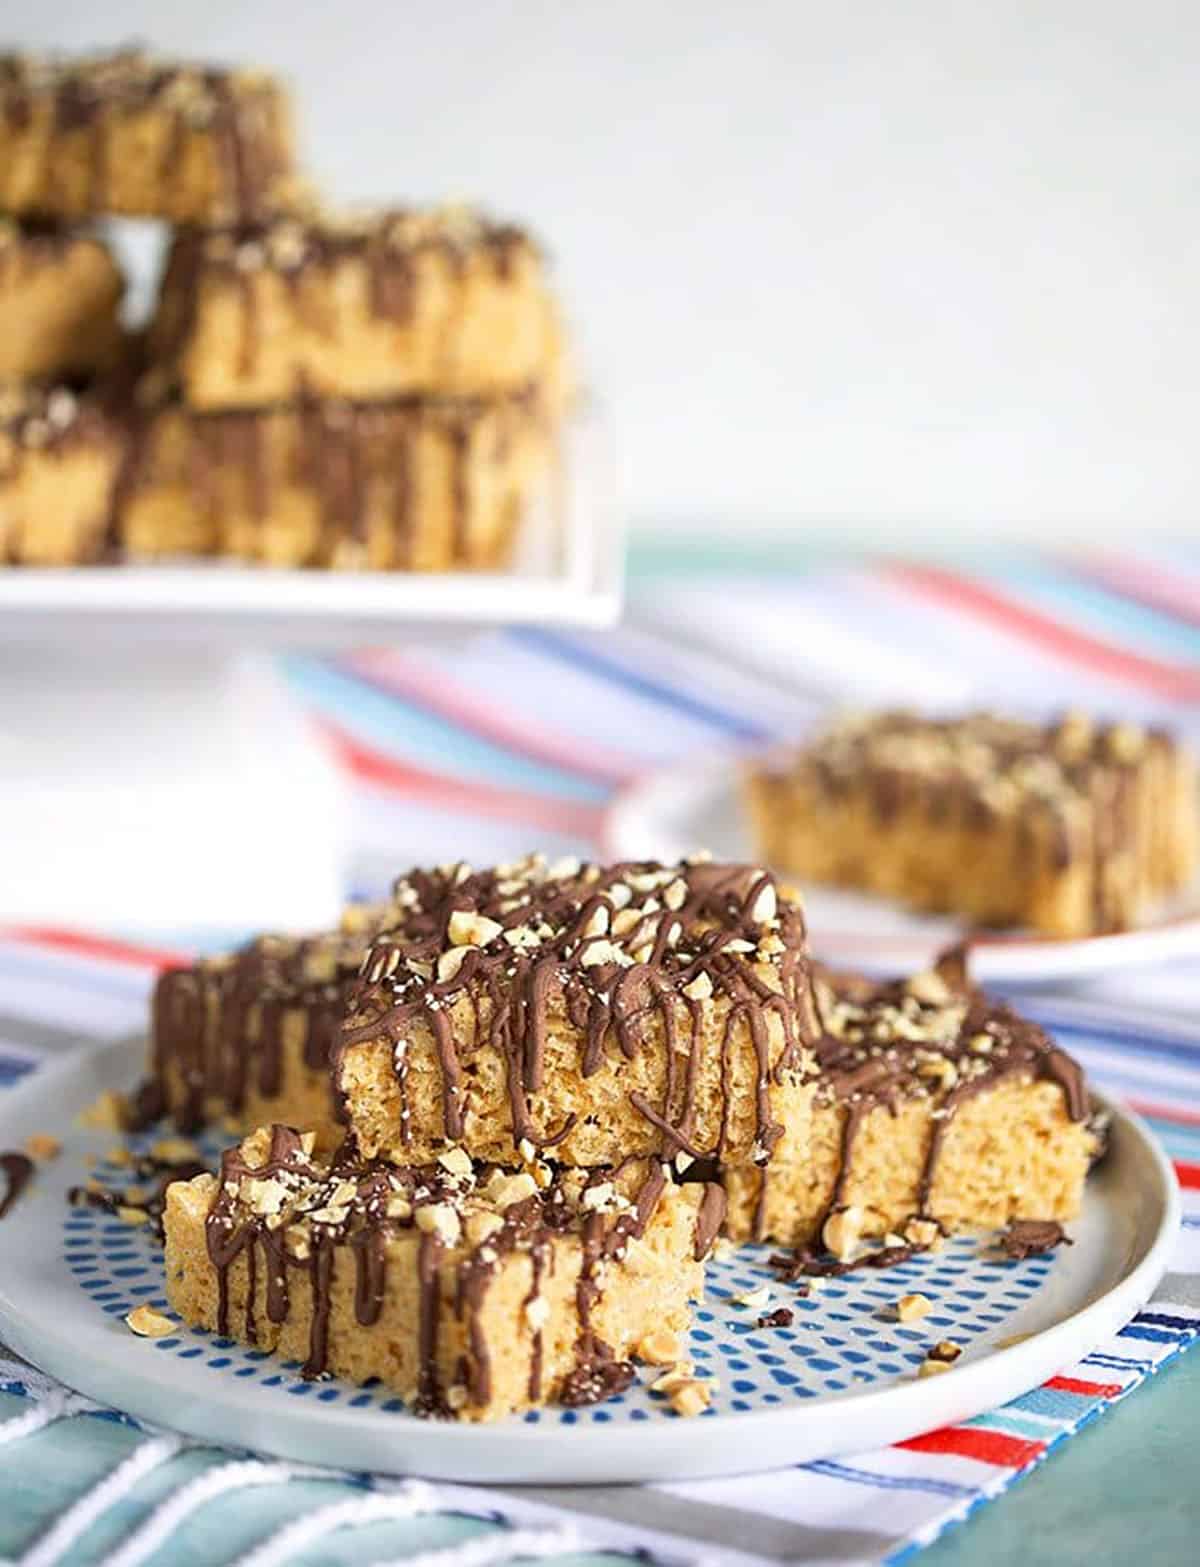 Chocolate Peanut Butter Rice Krispie treats on a plate with a cake plate in the background.